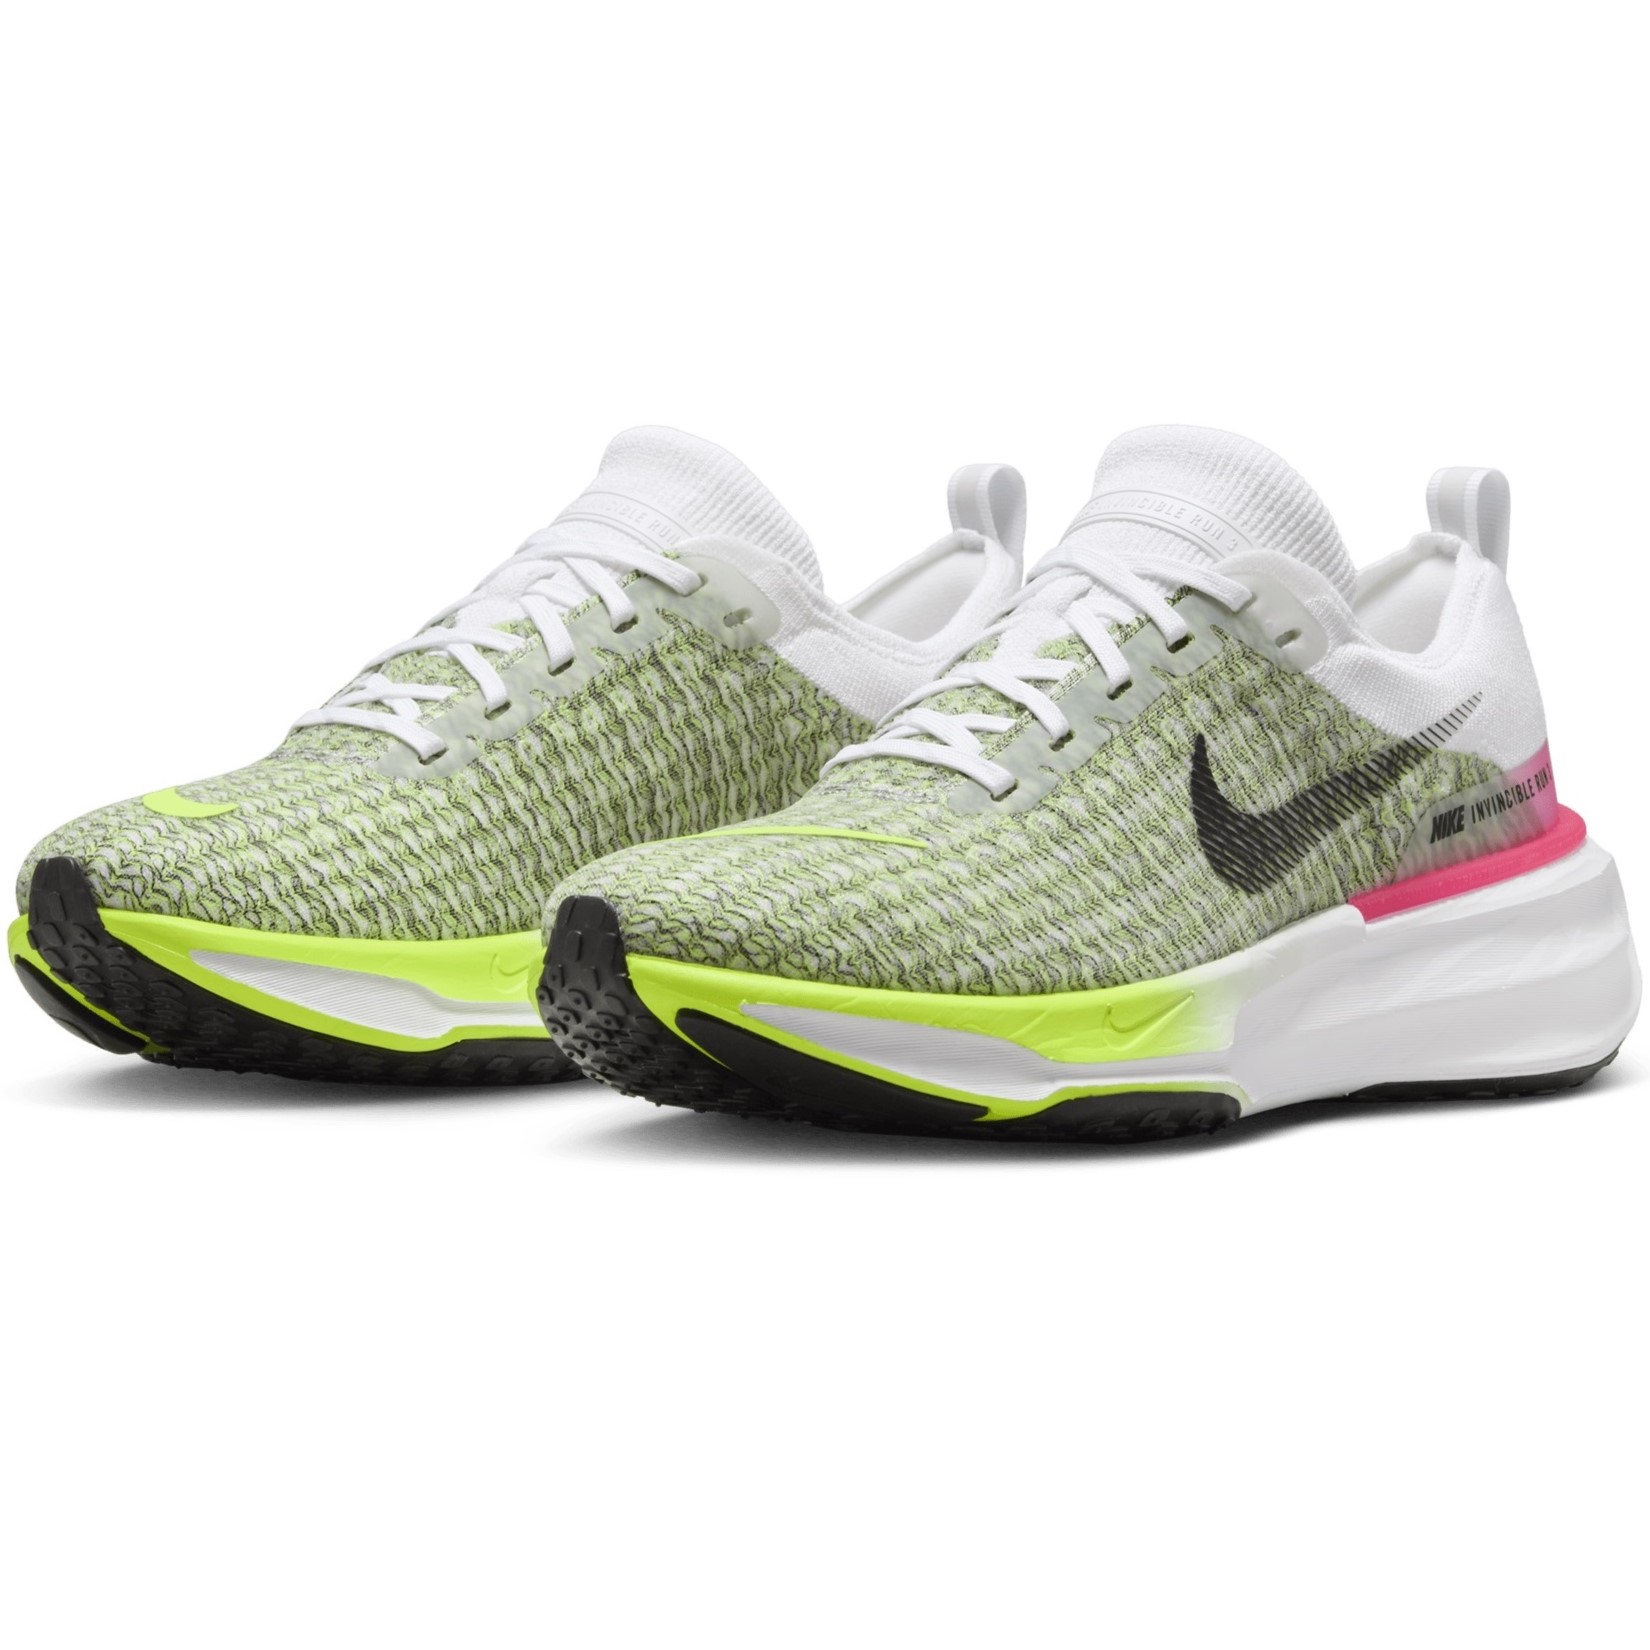 GIÀY NIKE NỮ WOMENS ZOOMX INVINCIBLE 3 ROAD RUNNING SHOES WHITE VOLT HYPER PINK FN6821-100 8